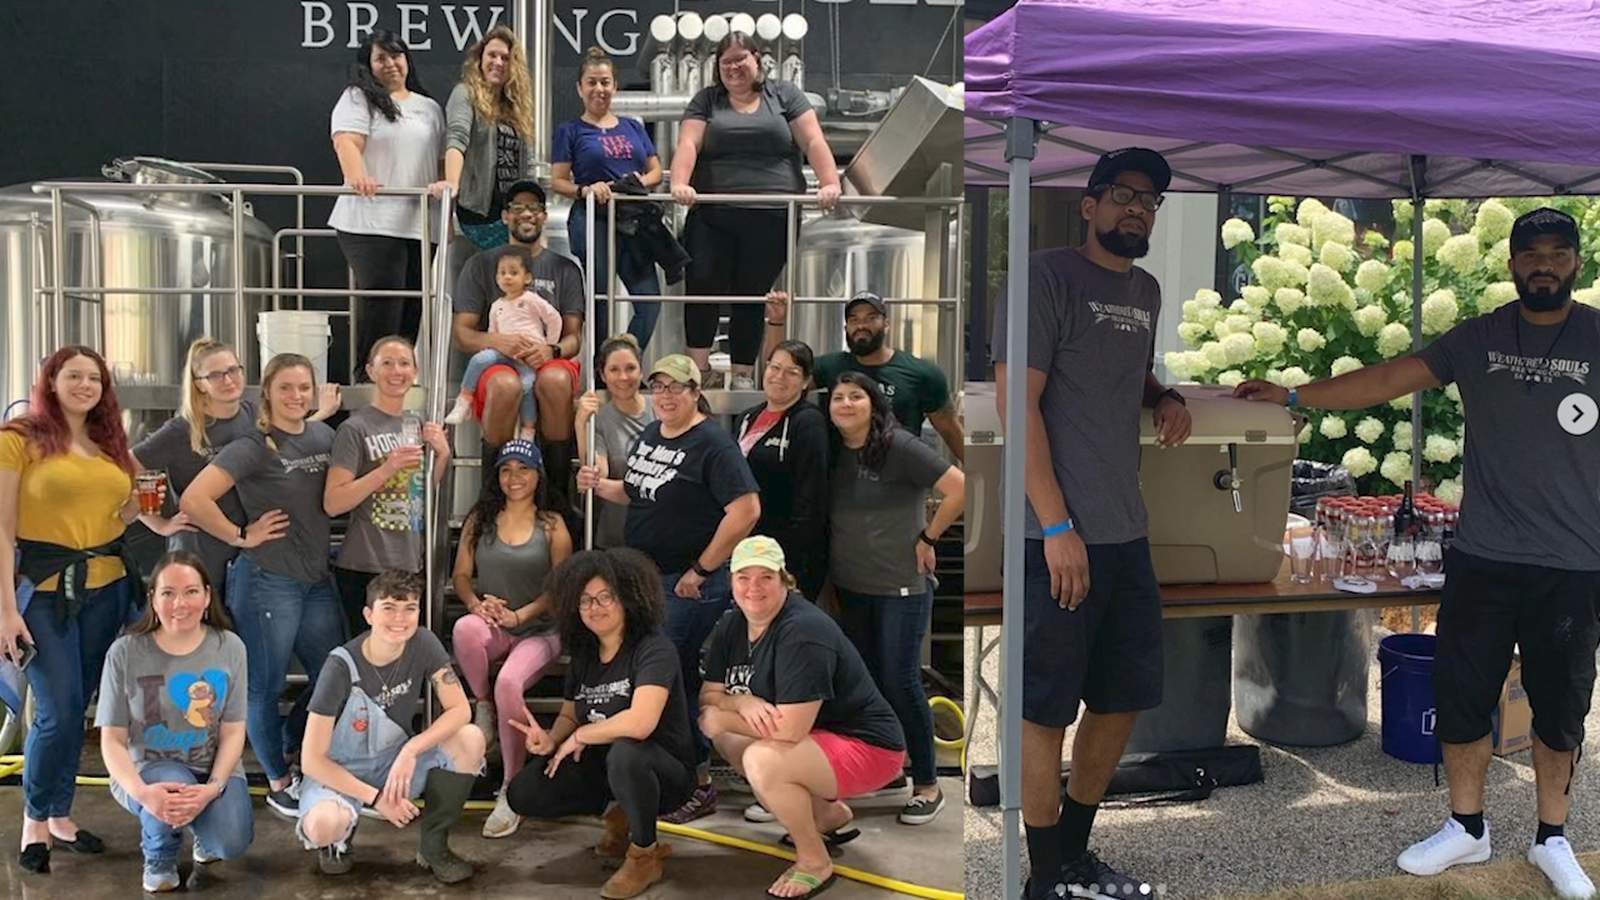 Message of equality sparks San Antonio brewery campaign thats spread around world